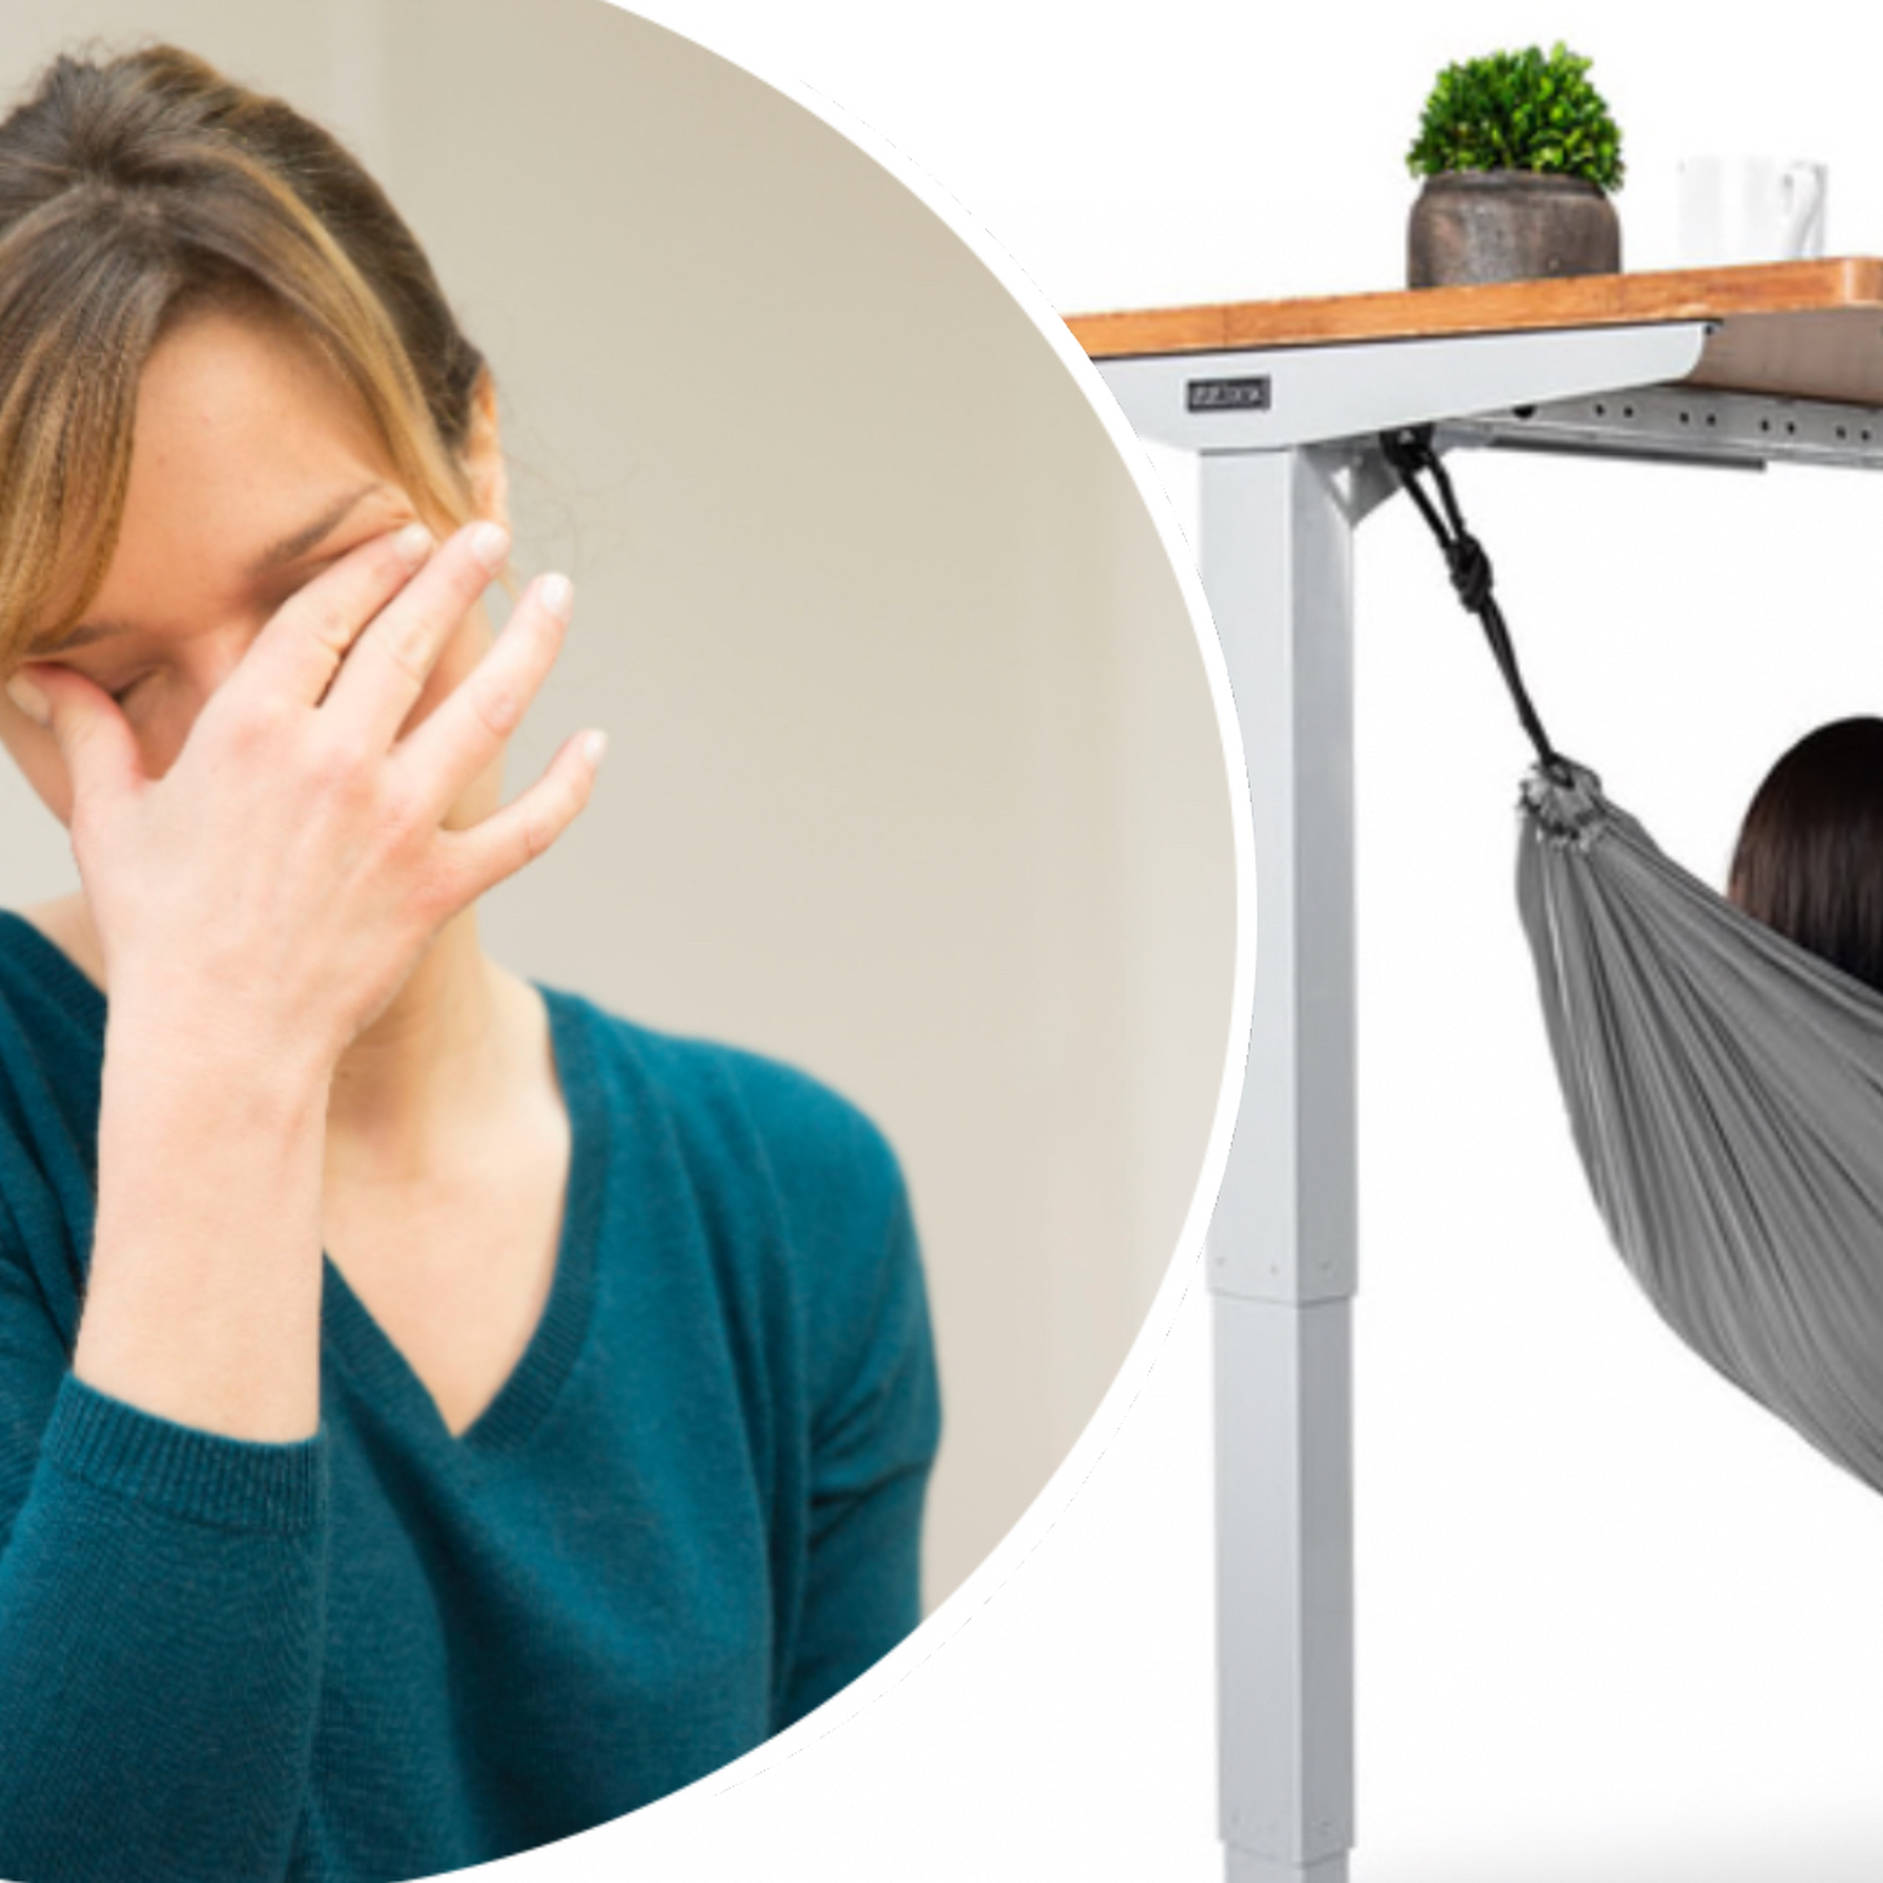 This handy under-desk hammock is the perfect way to nap at work